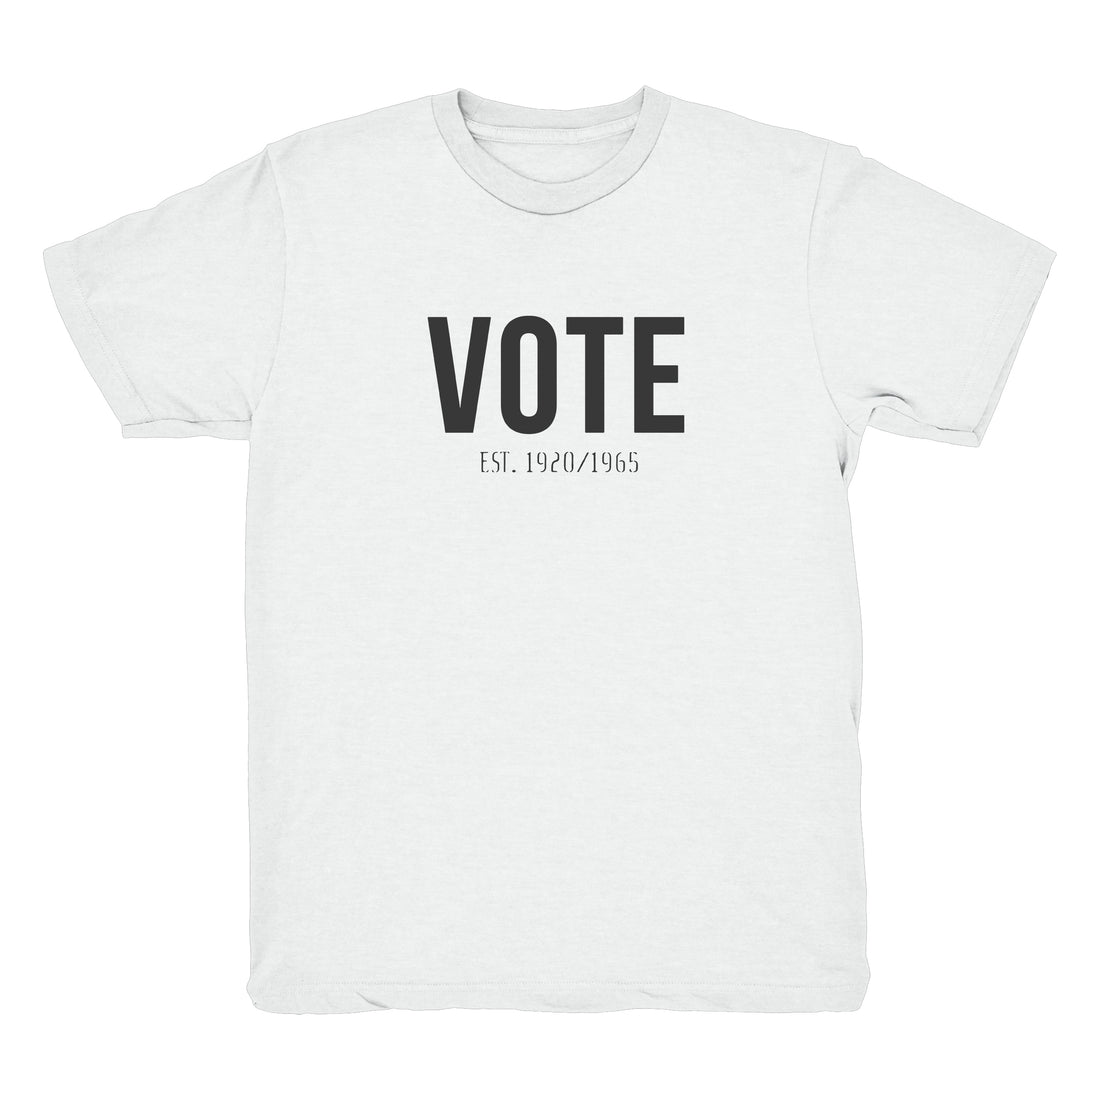 VOTE Youth T-Shirt